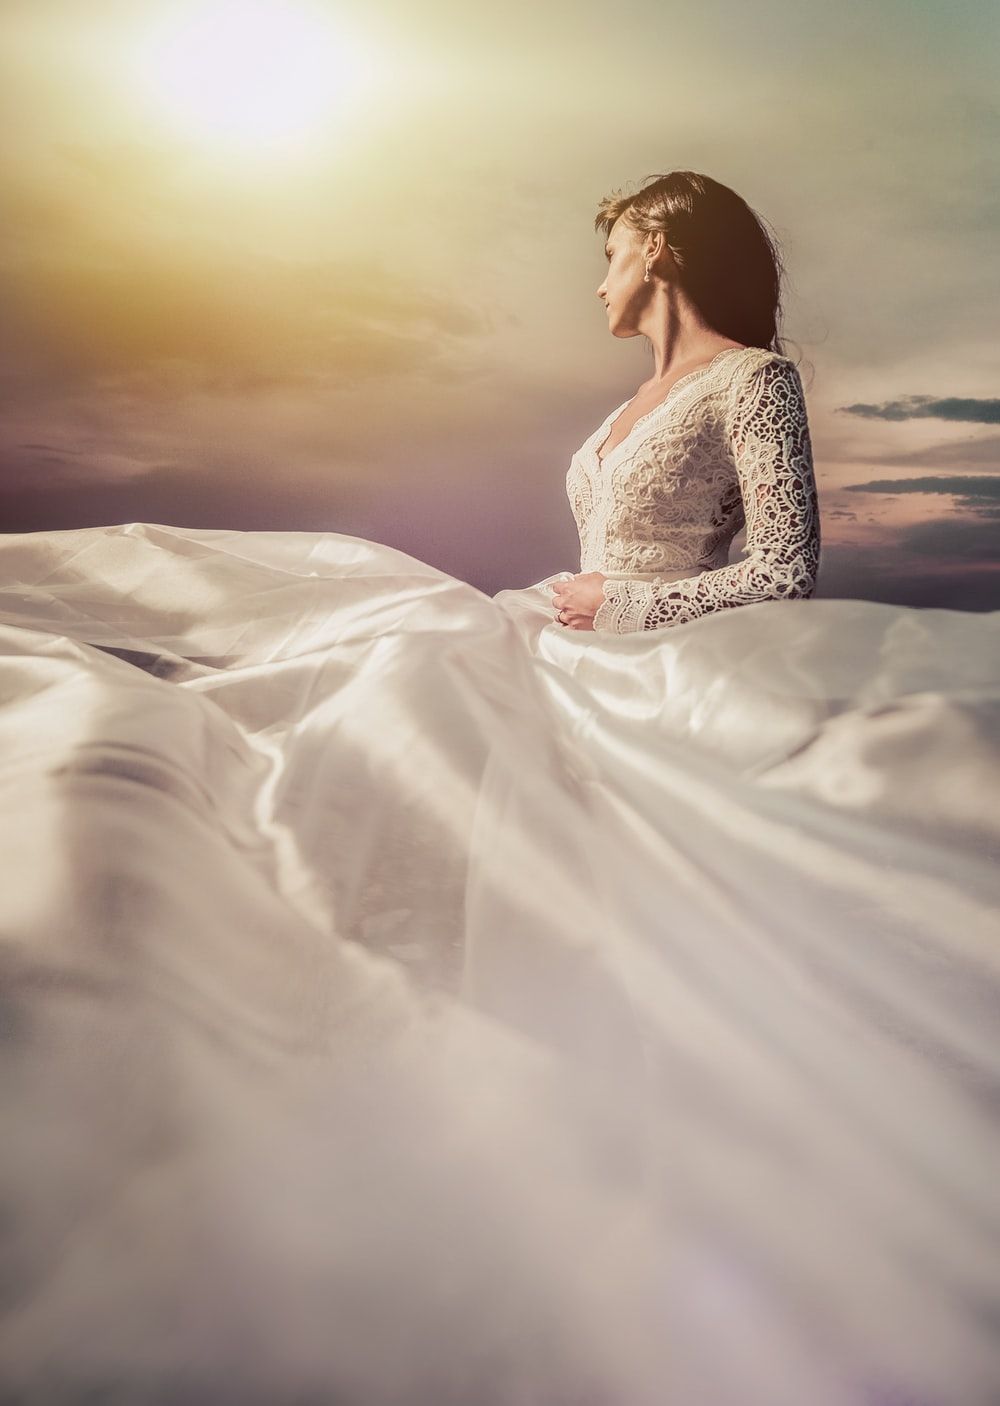 Wedding Dress Picture. Download Free Image &